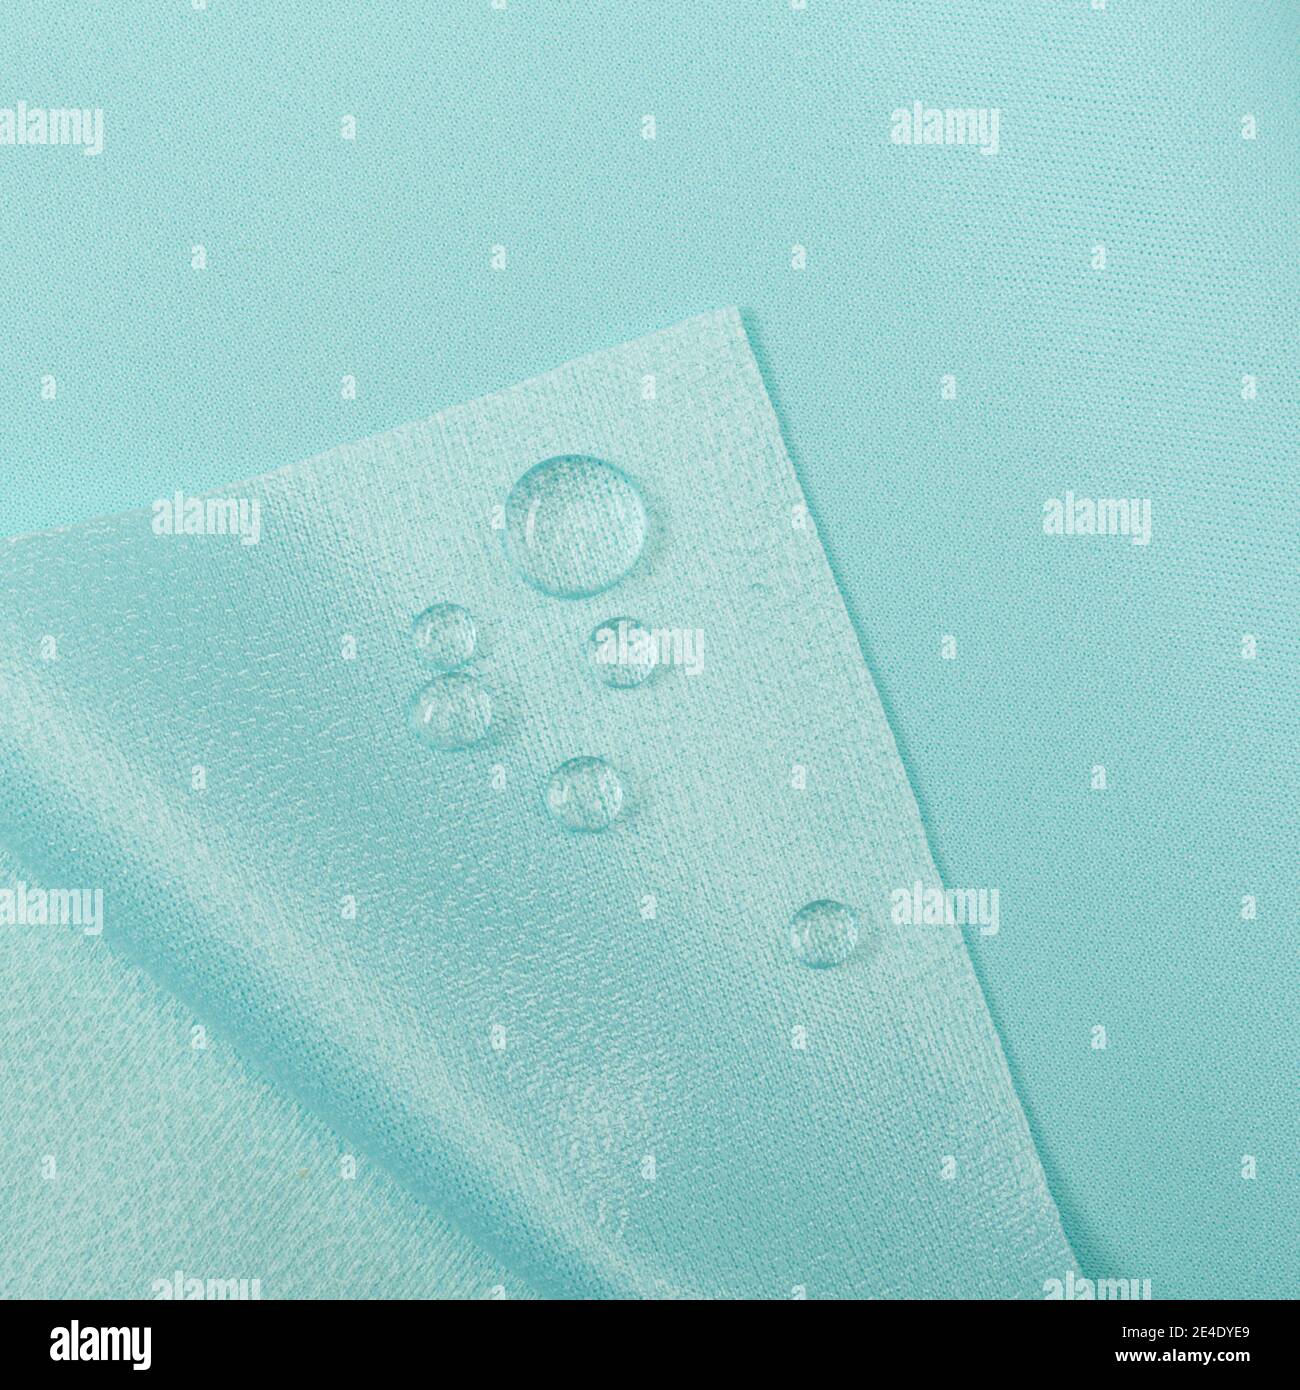 Drops of water on water resistant fabric Stock Photo